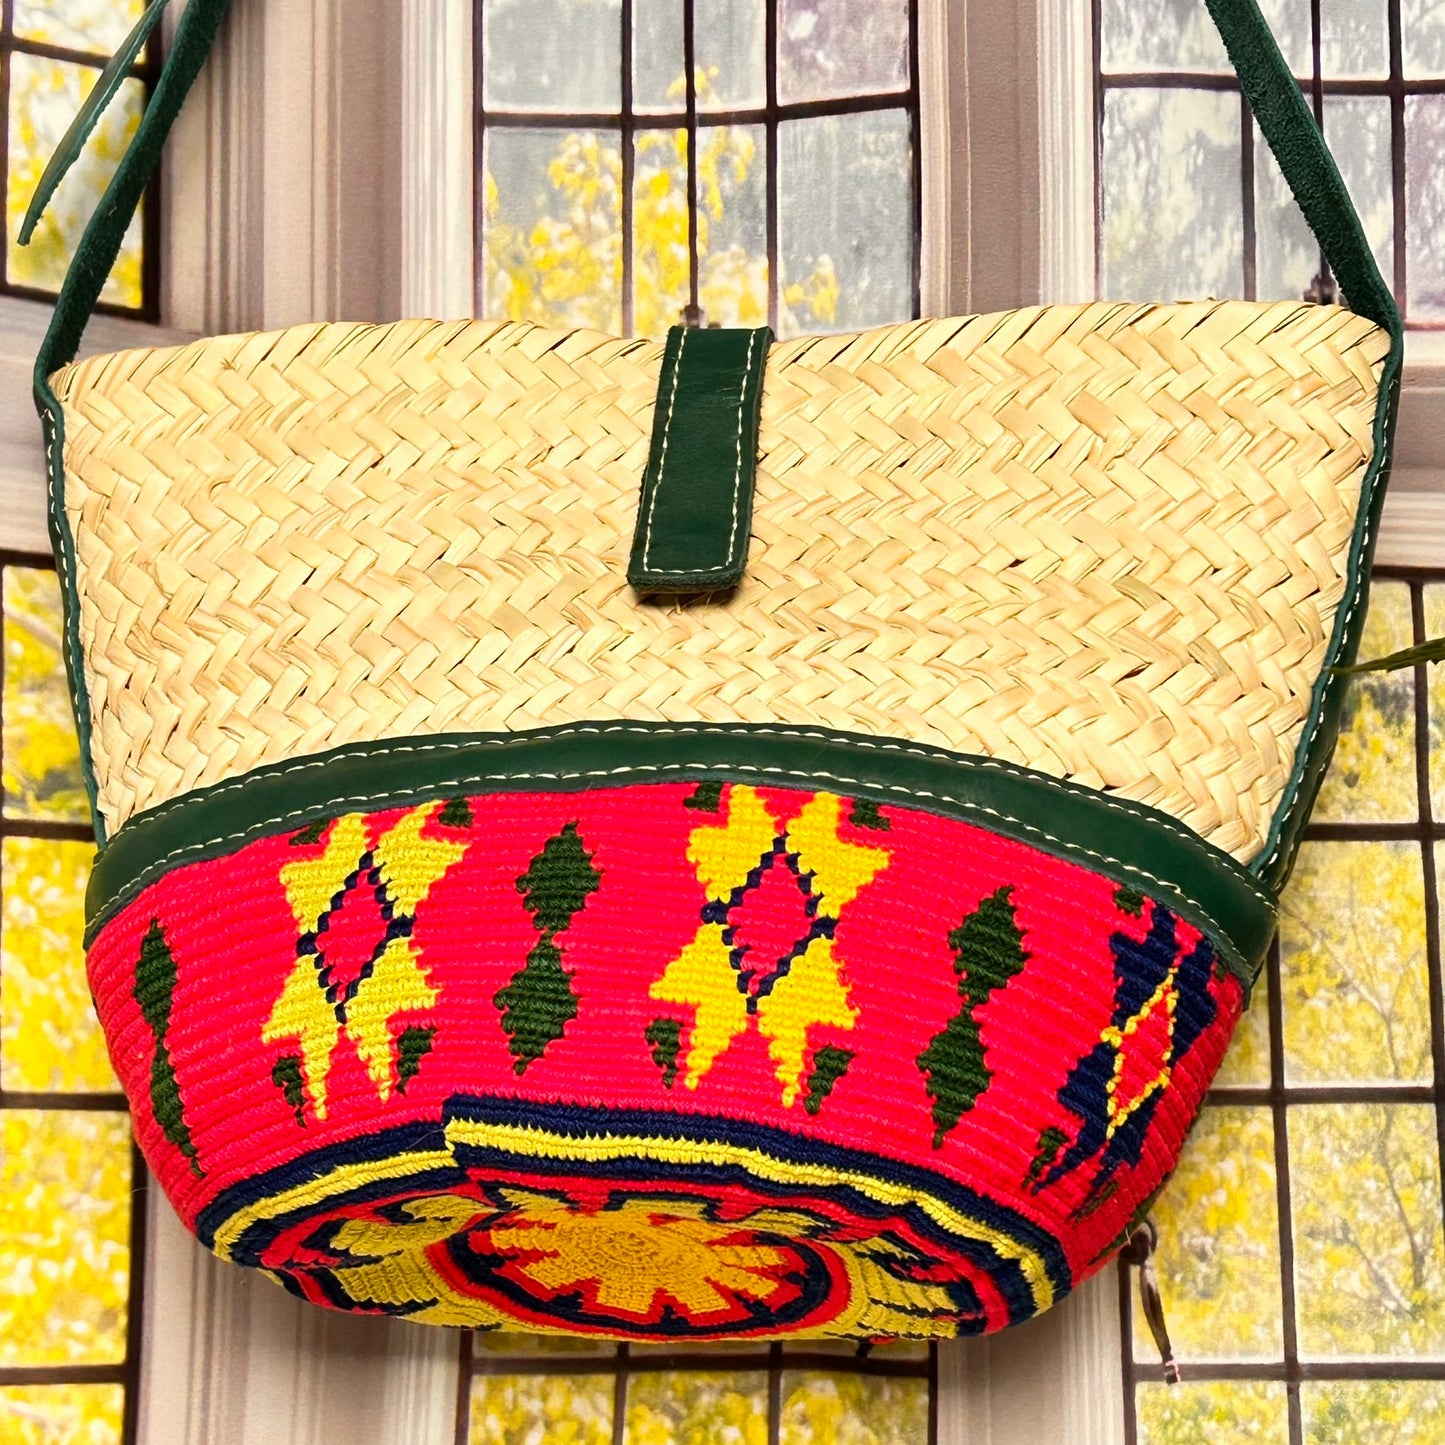 Nature's Embrace: Upcycled Palm Tree Bags